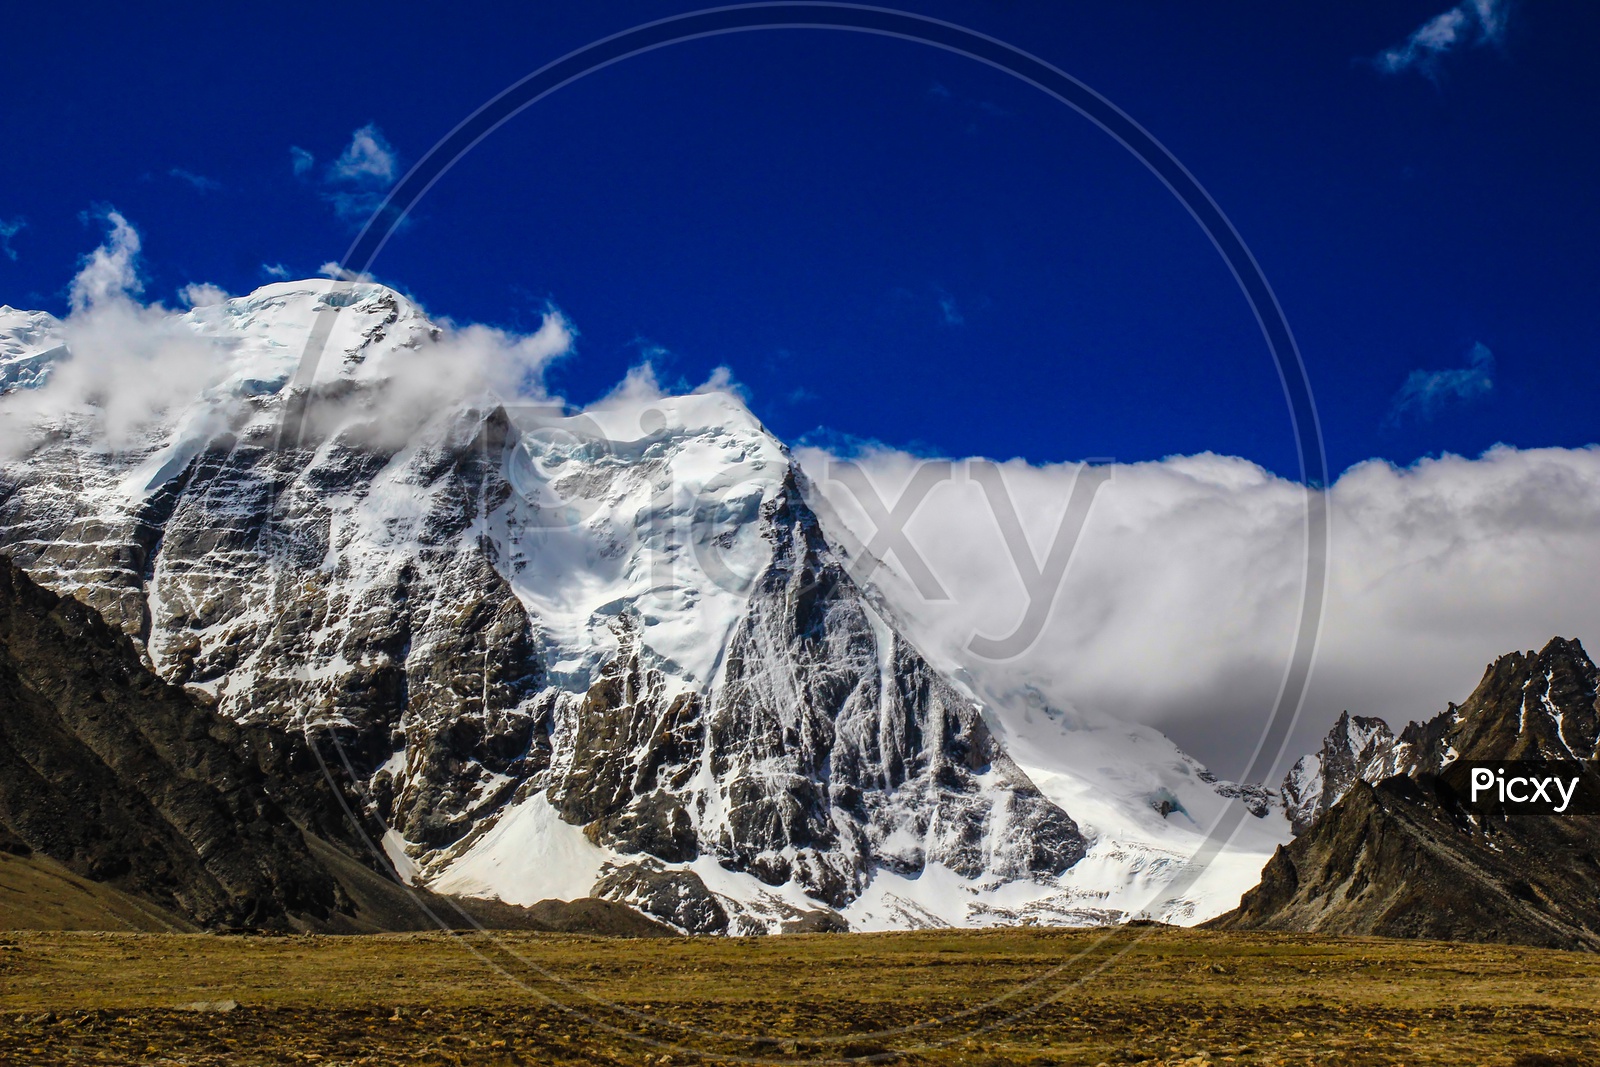 Landscape Of Deep Blue Sky And Ice Capped Peaks Of Himalayan Mountains With White Clouds During Day Time